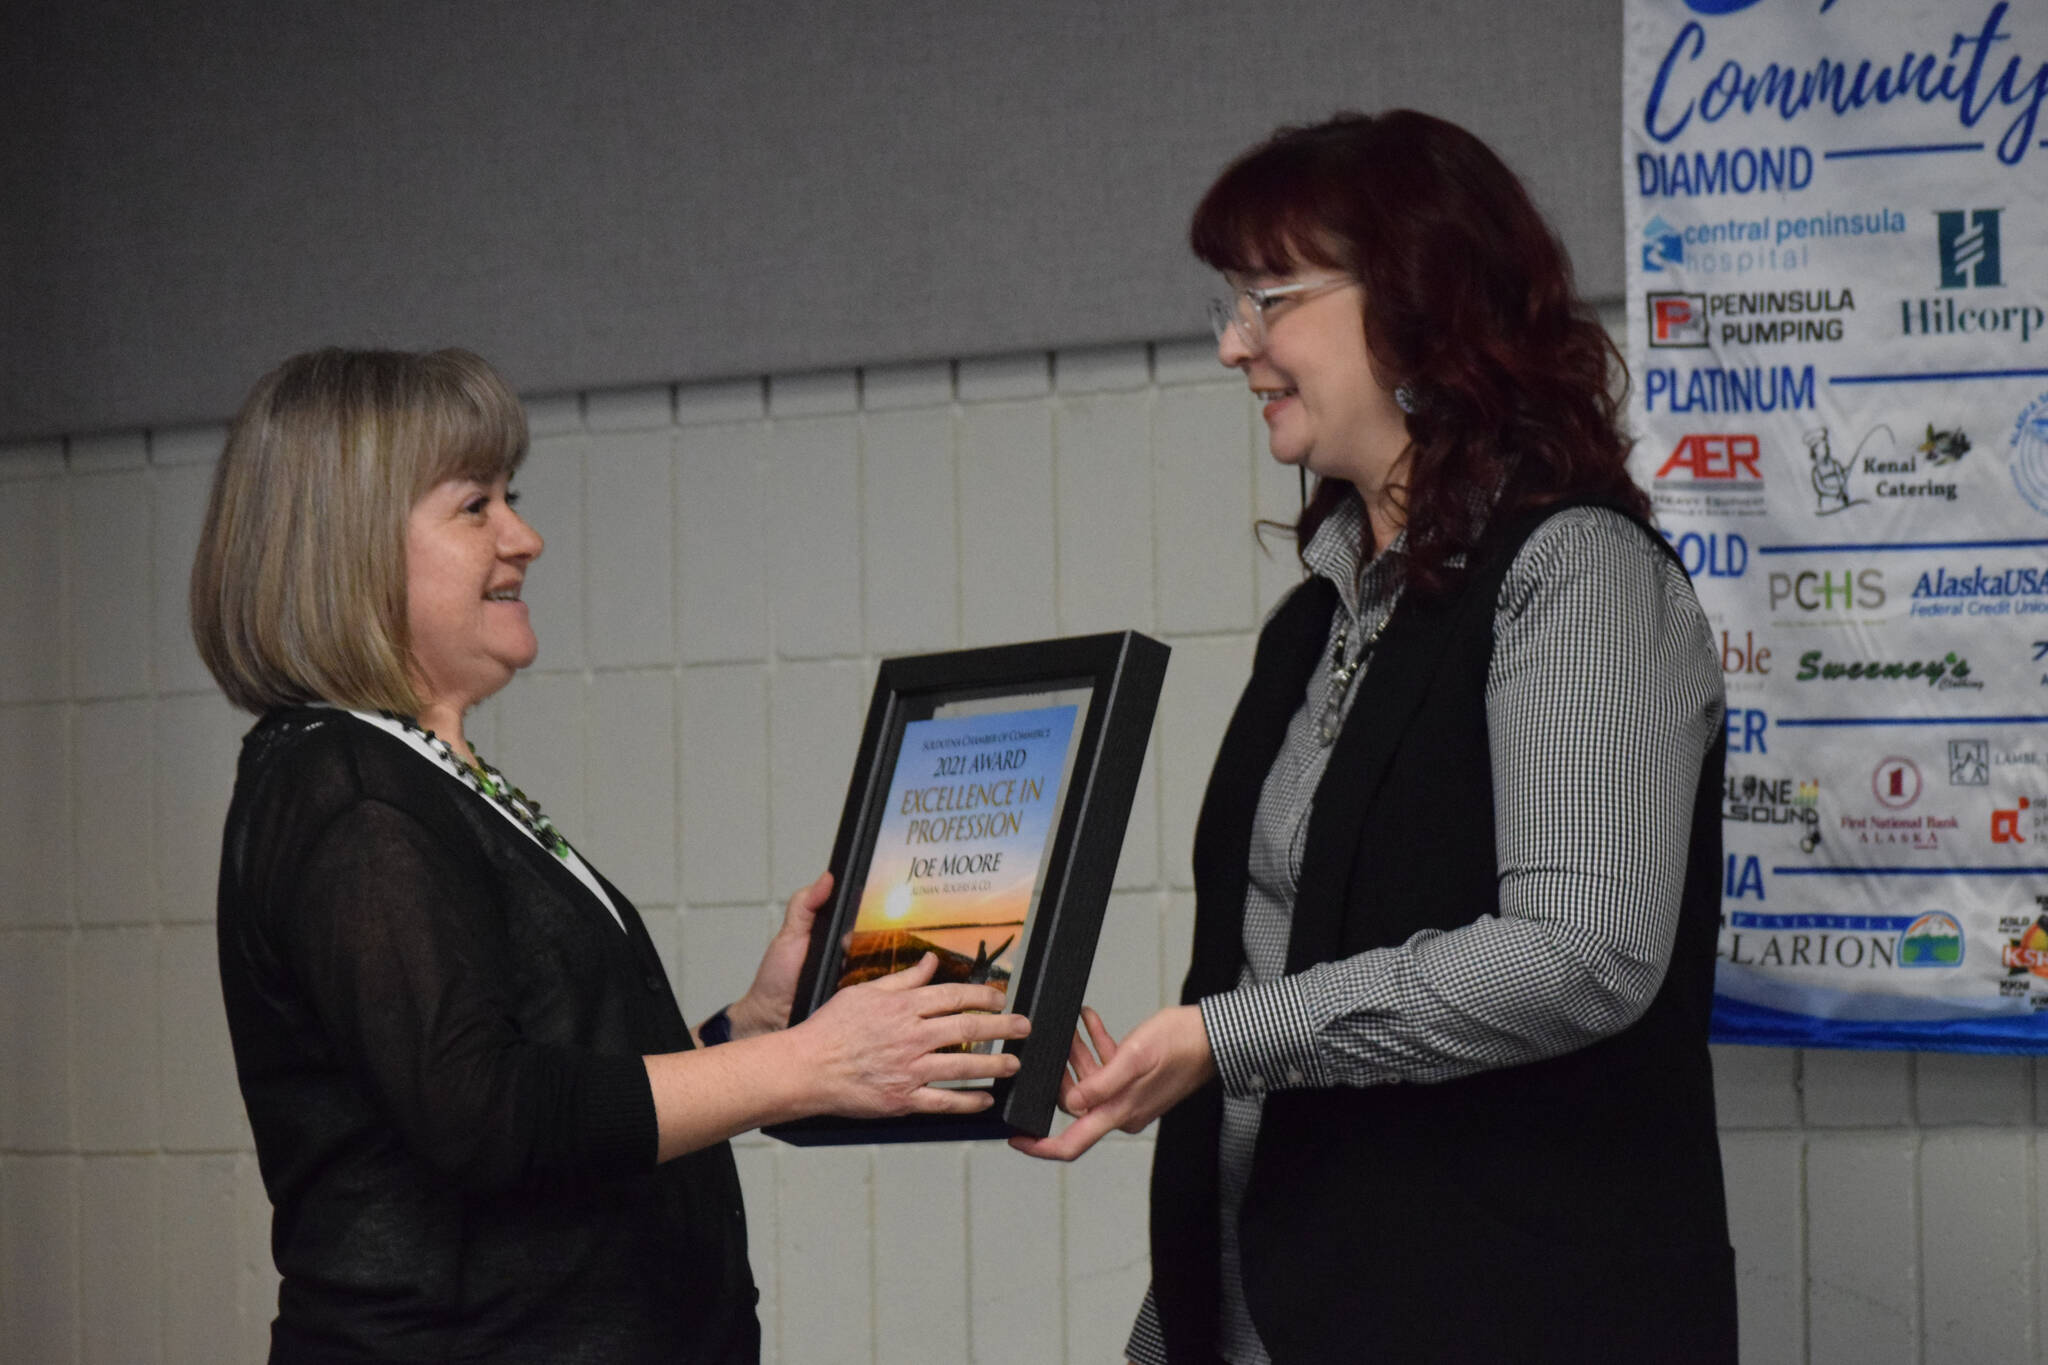 Monica Frost accepts the Soldotna Chamber of Commerce’s Excellence in profession award from Sara Hondel on behalf of Joe Moore of the Altman, Rogers Co. certified public accounting firm, during the chamber’s 2021 award ceremony at the Soldotna Sports Complex on Wednesday, Feb. 9, 2022. (Camille Botello/Peninsula Clarion)